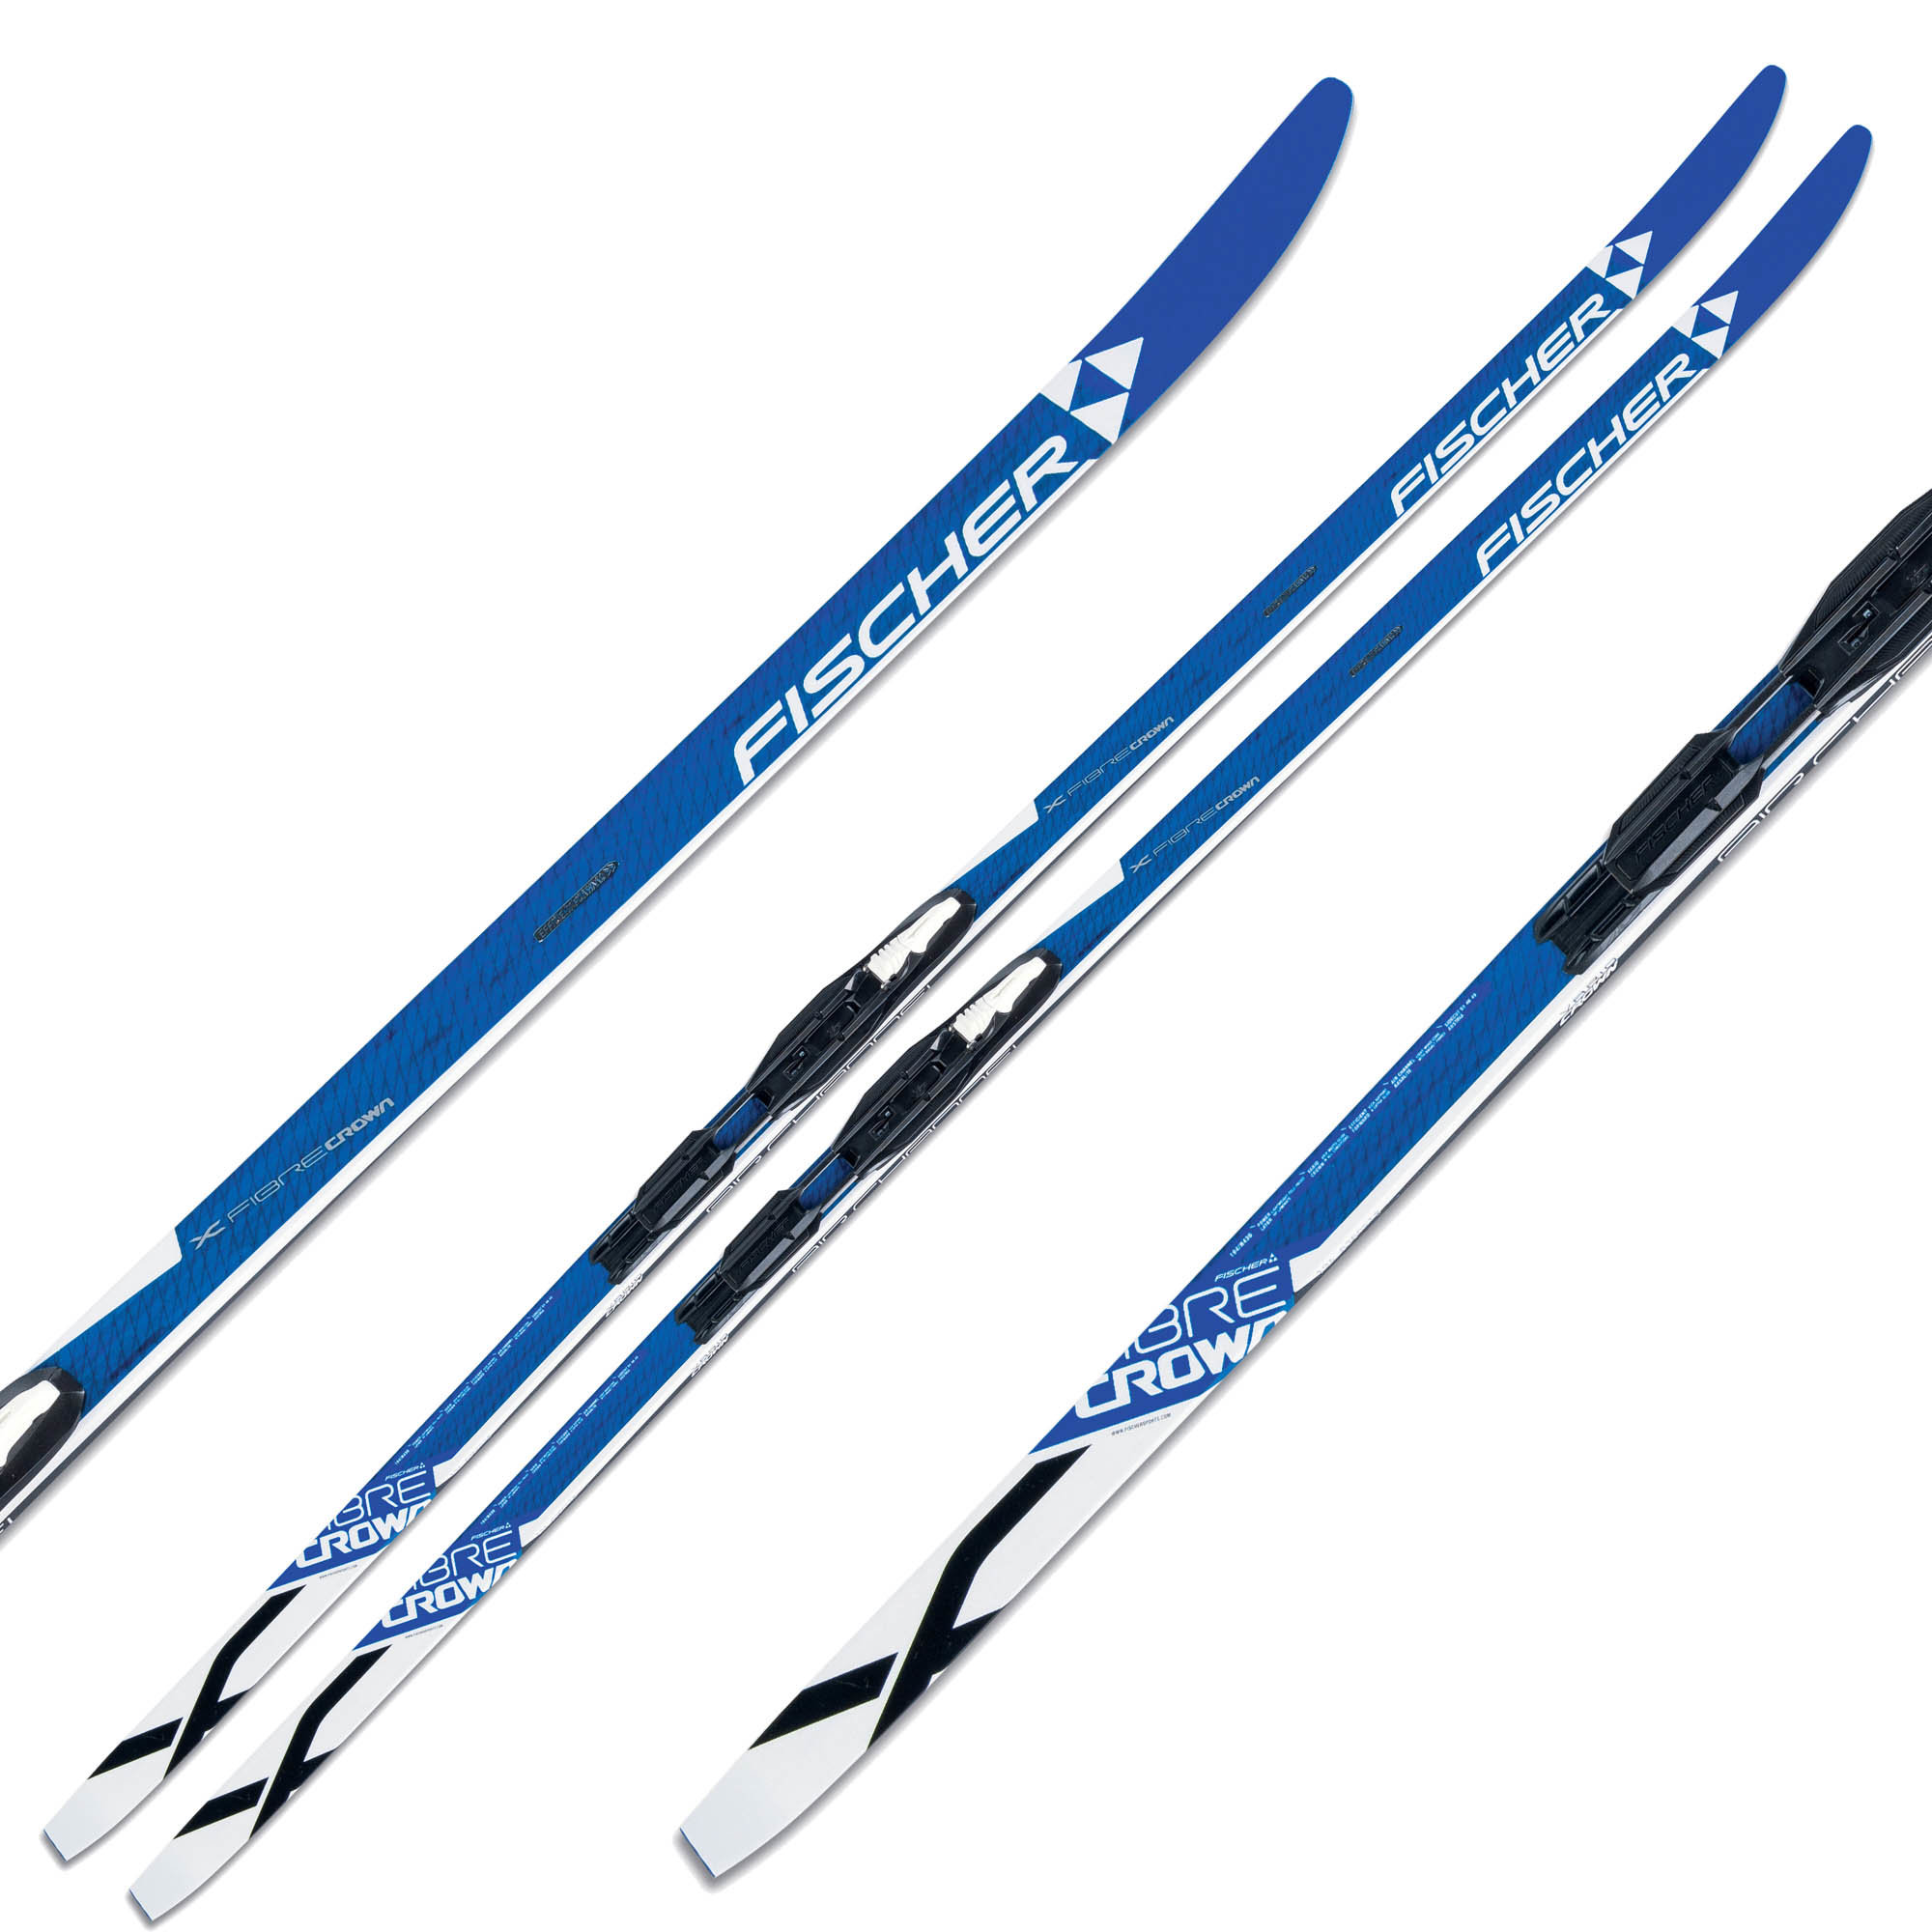 The 9 Best Cross-Country Skis for 2021 7